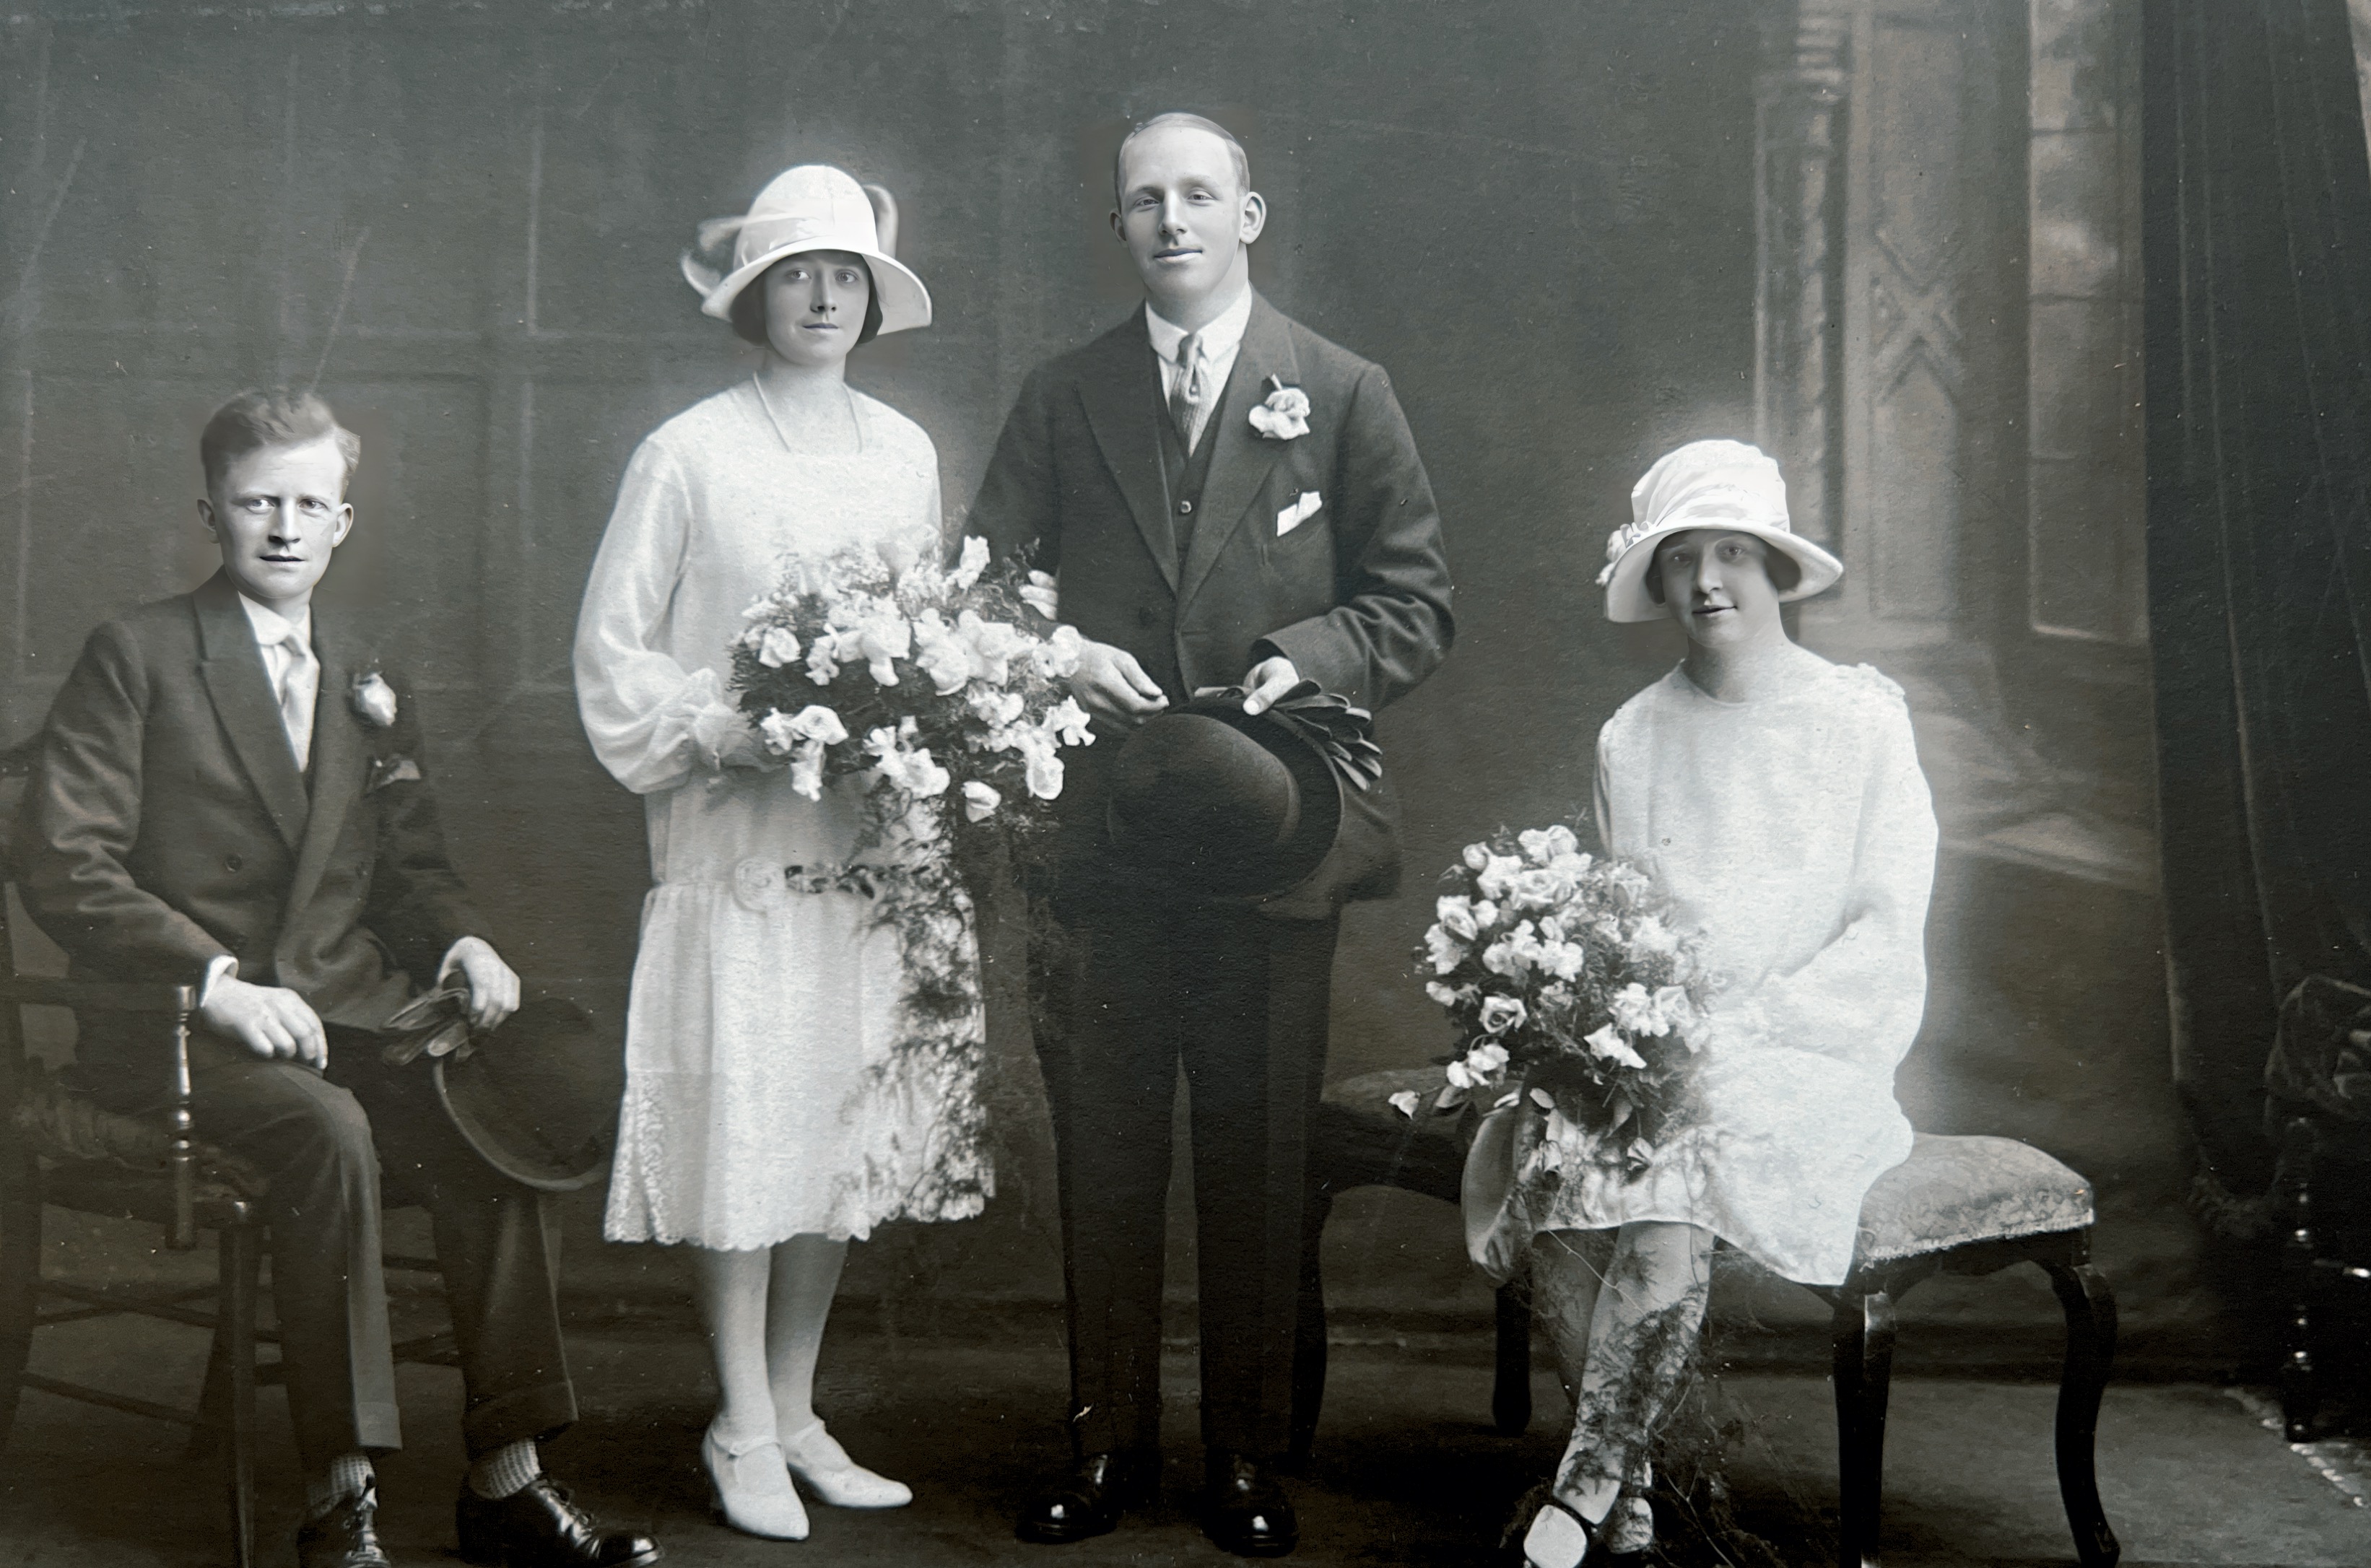 Dad’s Mum and Dad’s Wedfing 1927. Grandma’s brother Bob & Nellie?